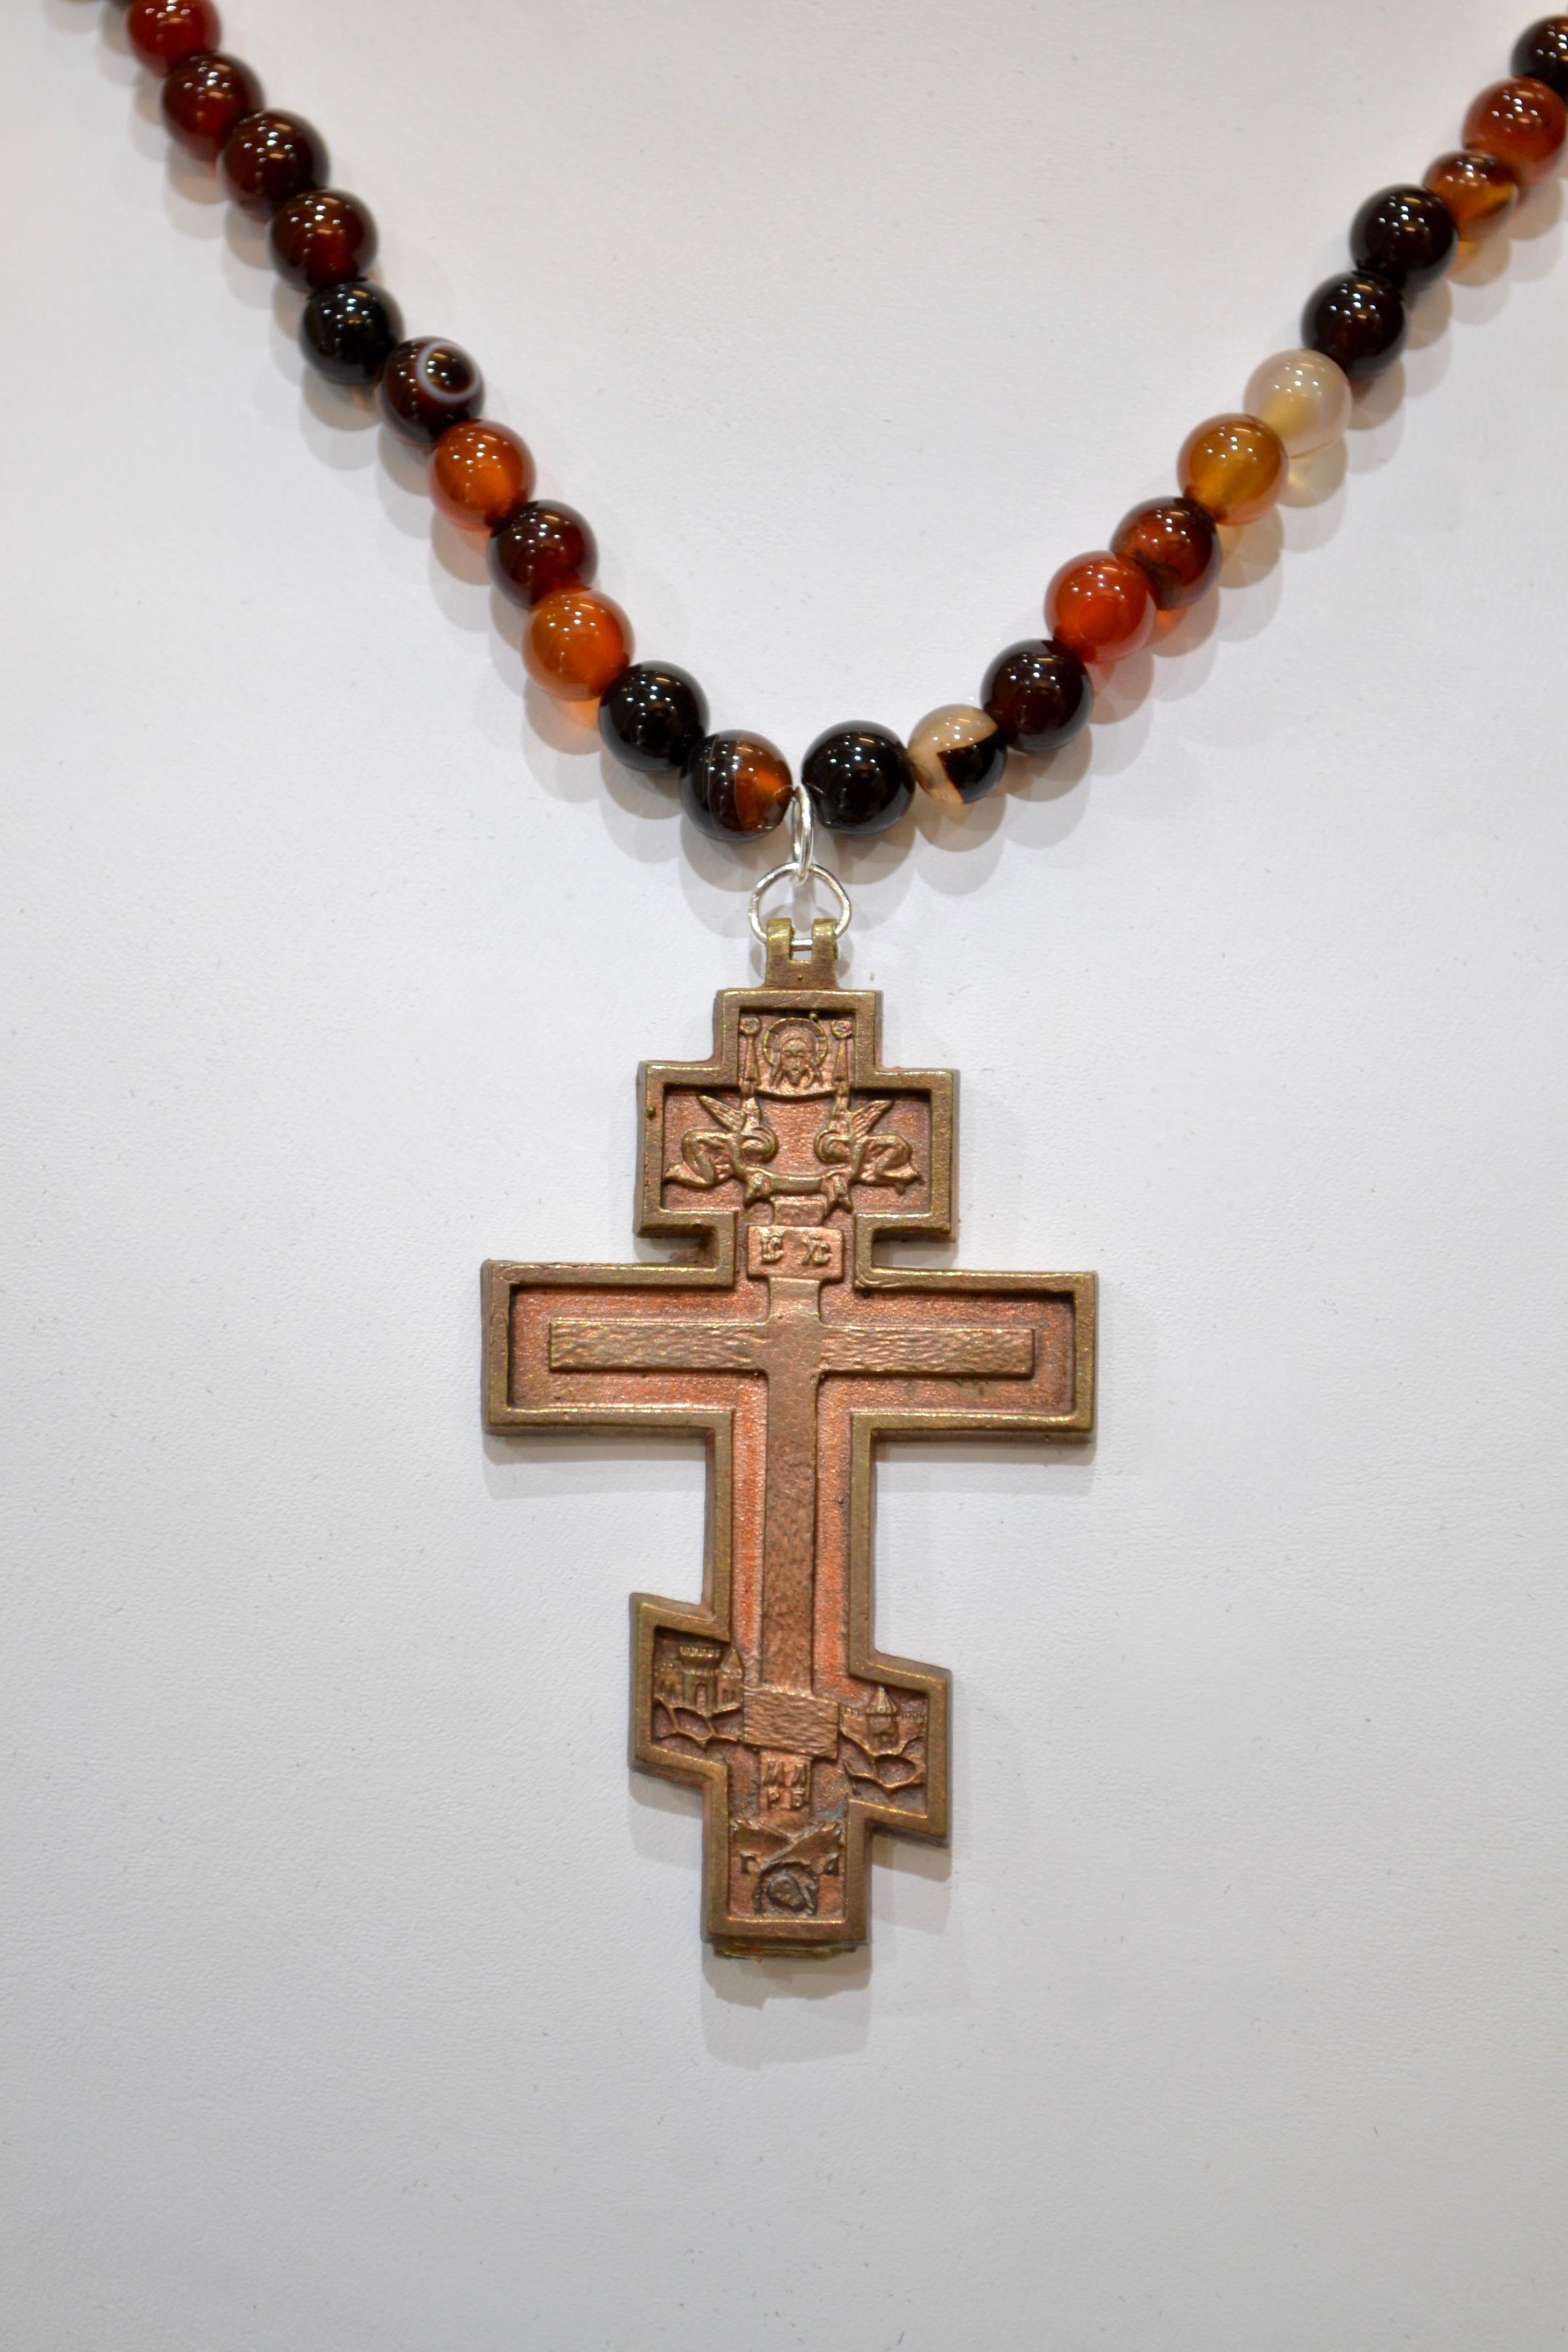 Post Medieval Bronze Cross Pendant. Professionally cleaned and polished to show original details. A beautiful necklace comprised of large red/brown agate beads accompanies the stunning pendant.